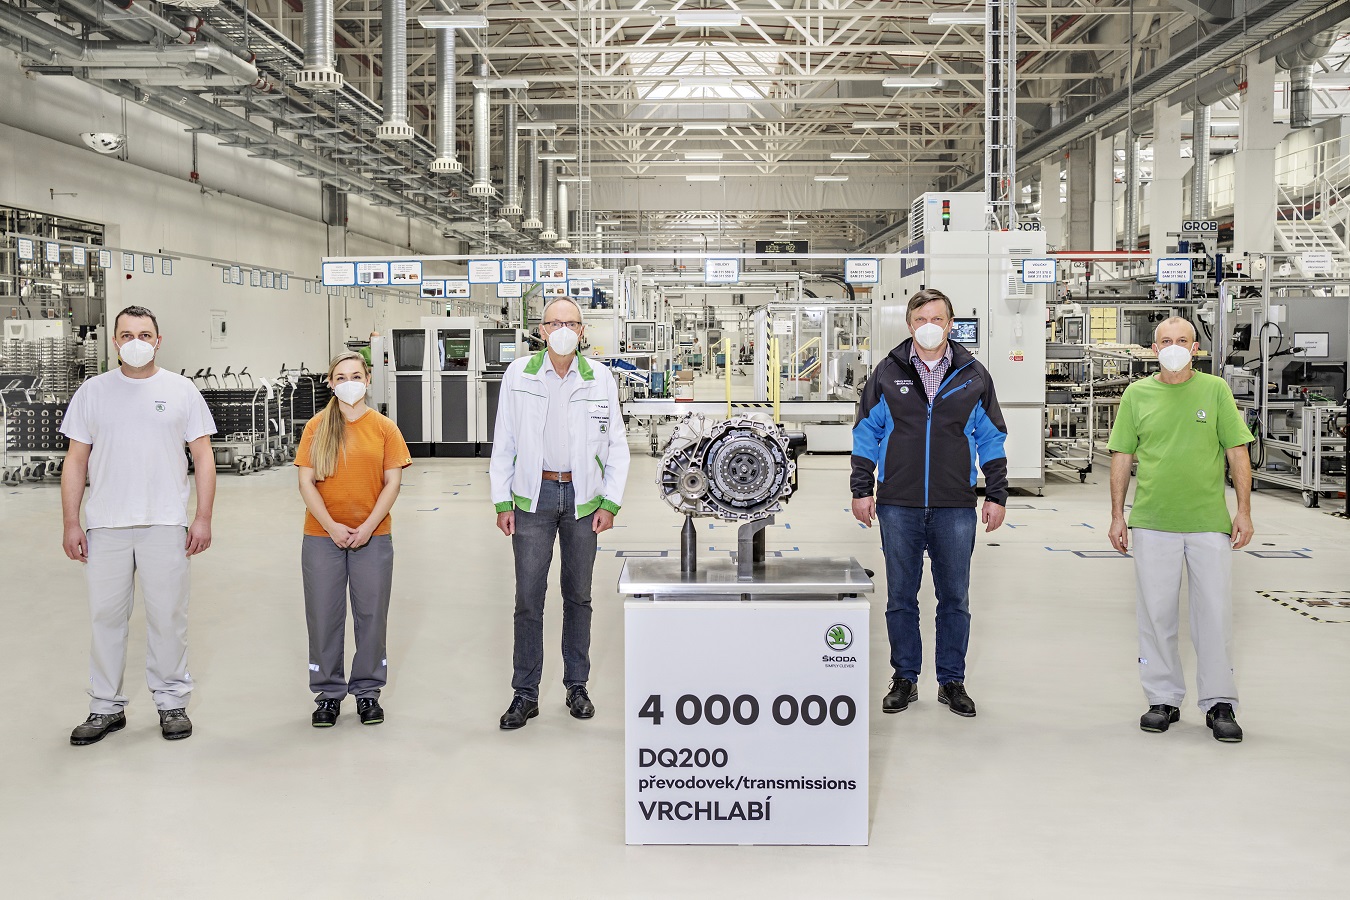 Production milestone at ŠKODA Vrchlabí plant: The 4th million DQ200  automatic direct-shift gearbox produced, EuropaWire.eu